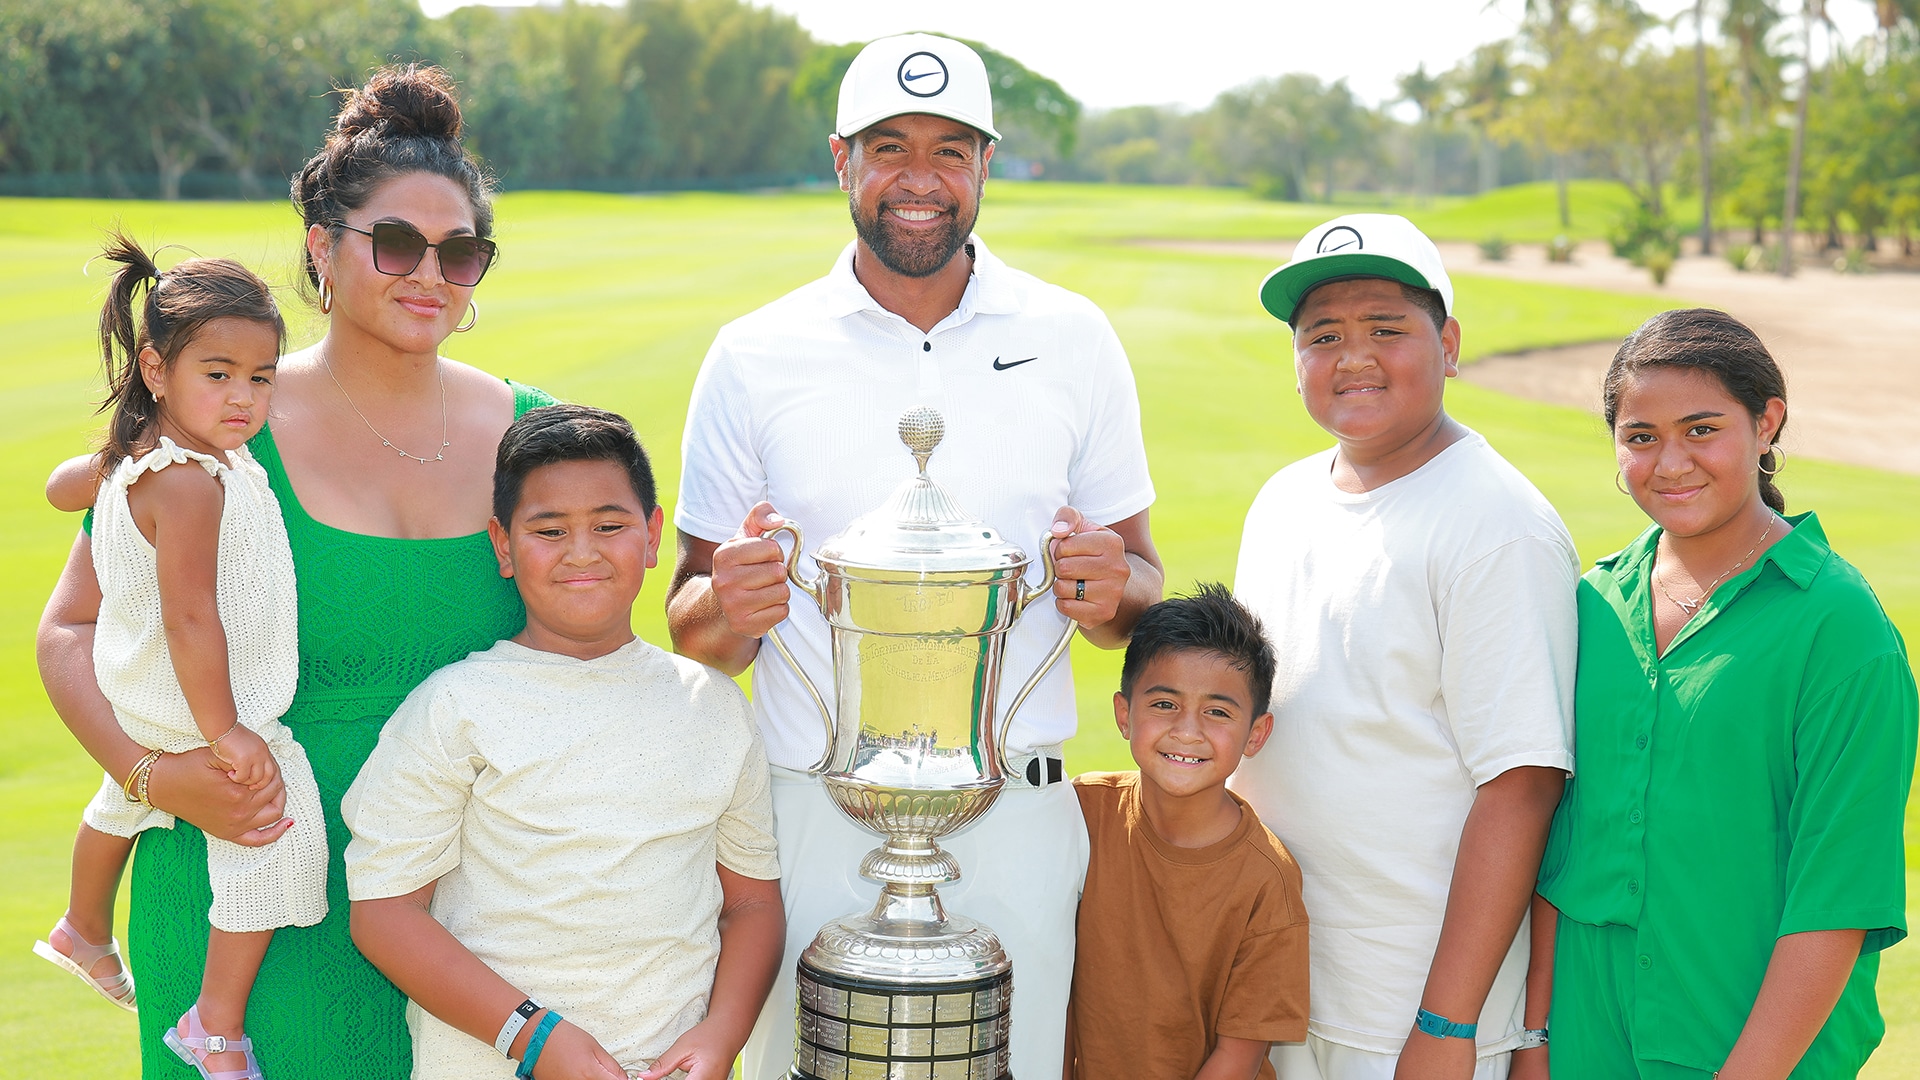 ‘My boys were counting on me’: Tony Finau on playing par-3 course just hours after Mexico win